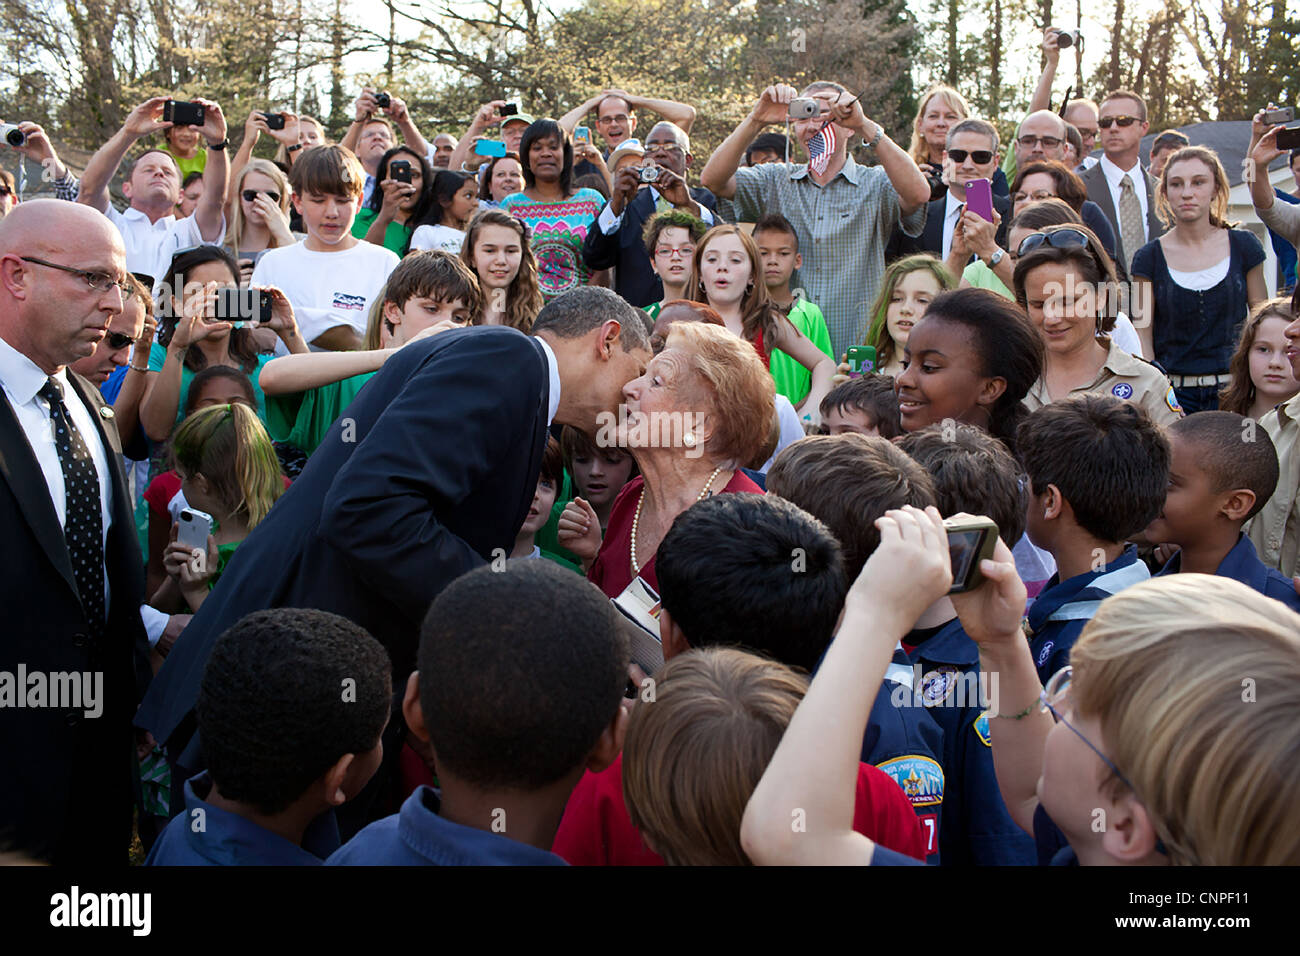 US President Barack Obama greets neighbors and supporters during a visit to a neighborhood for an event March 16, 2012 in Atlanta, GA. Stock Photo